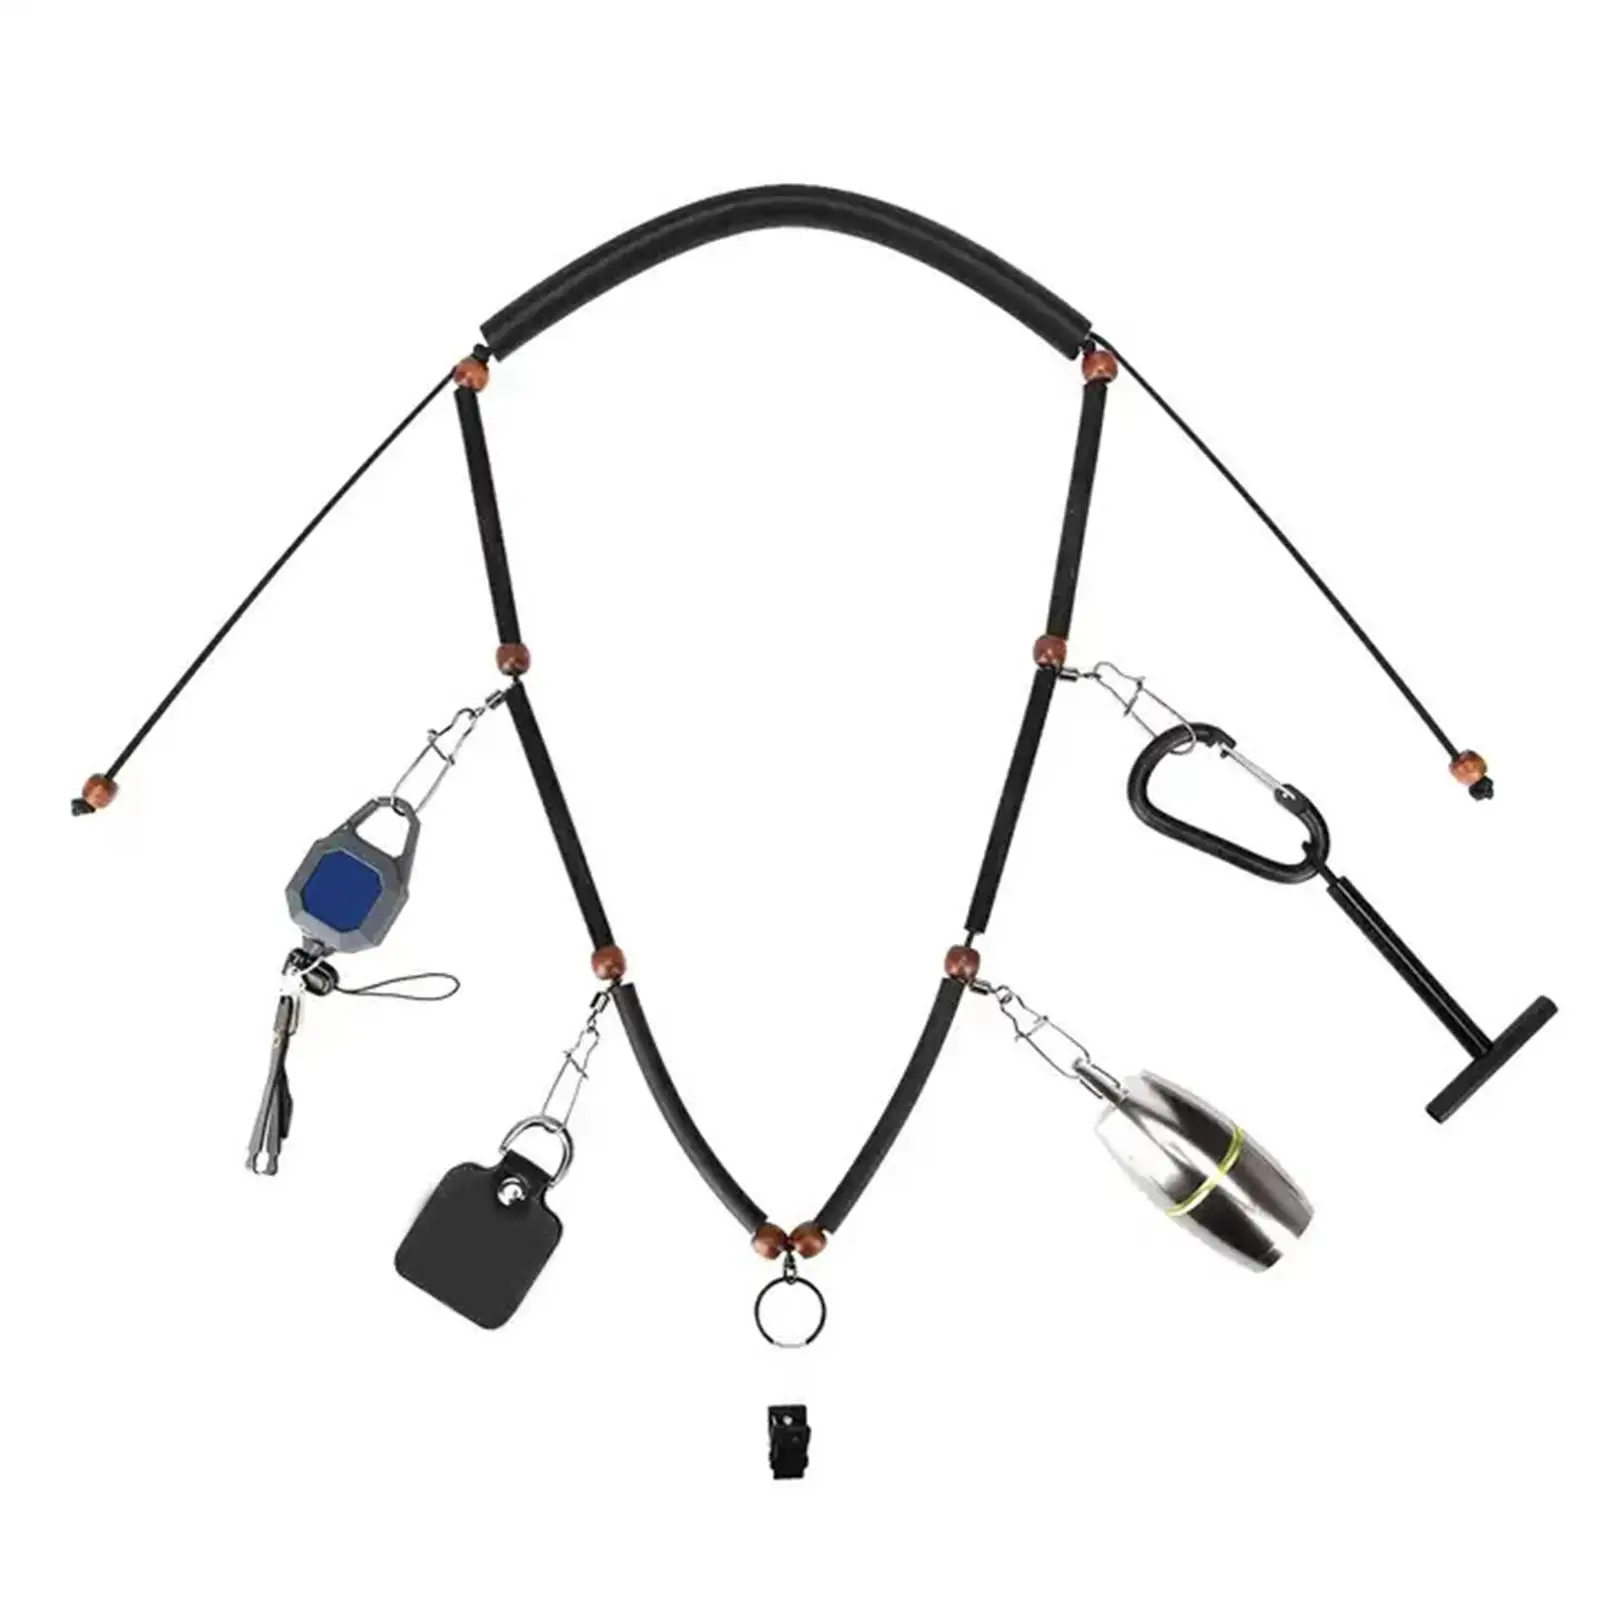 Fly Fishing Lanyard Hanging Necklace Fishing Accessories Neck Strap Durable Fly Fishing Tool Holder Lanyard for Hunting Camping